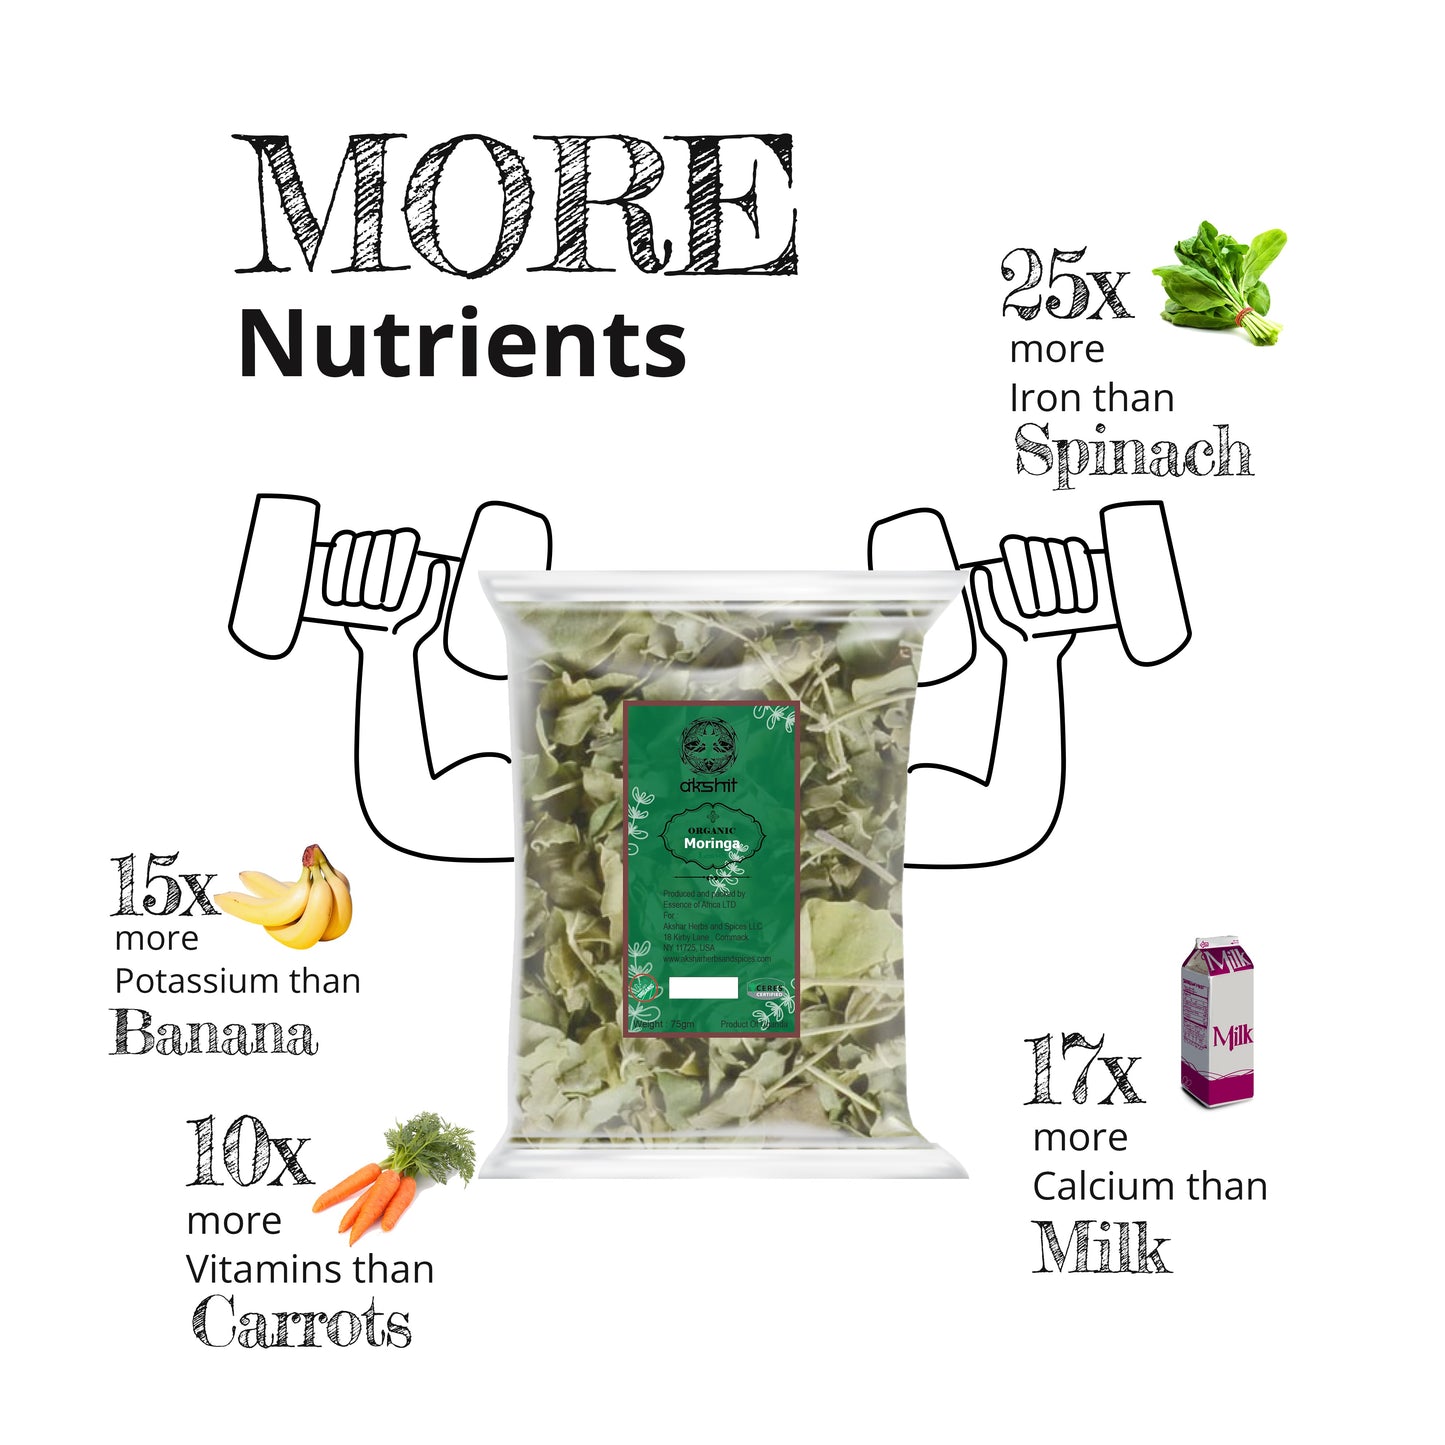 
                  
                    This amazing nutrient-dense gift from nature has been used as a dietary supplement for thousands of years by different cultures across the globe The Moringa “Miracle Tree” boasts an amazing 30% plant-based protein, 90+ all-natural vitamins and minerals, all 8 essential amino acids, 46 powerful antioxidants, Omega's 3, 6 and 9, calcium, potassium, iron, zinc and Vitamins A, K and C
                  
                